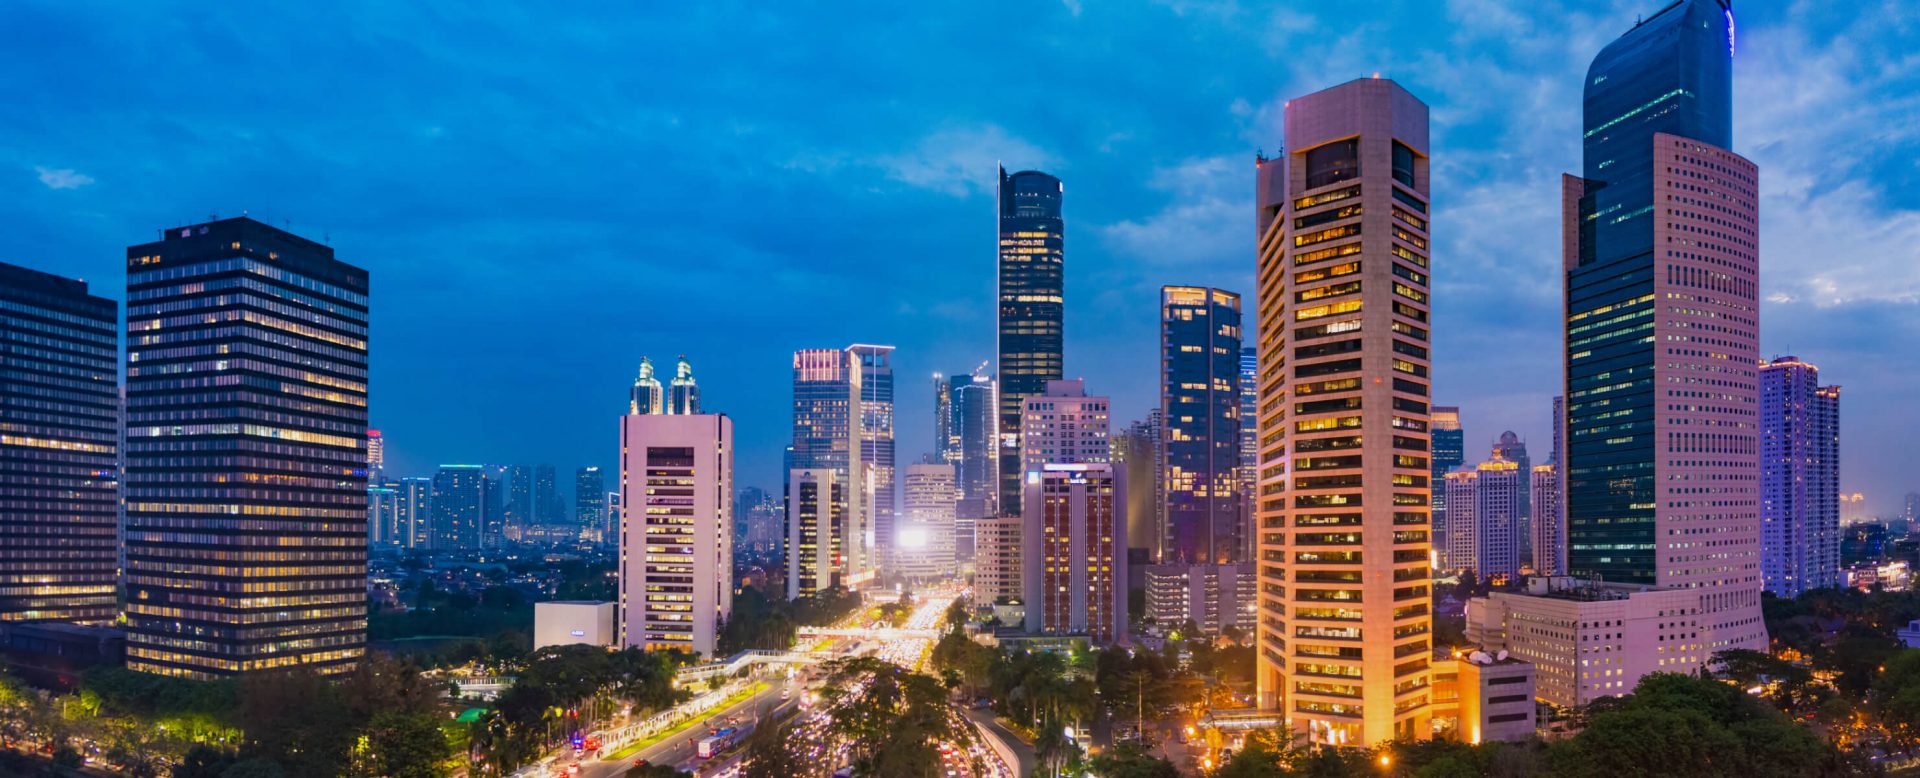 The early evening city skyline of Jakarta, where the DZ BANK representative office for Indonesia is located